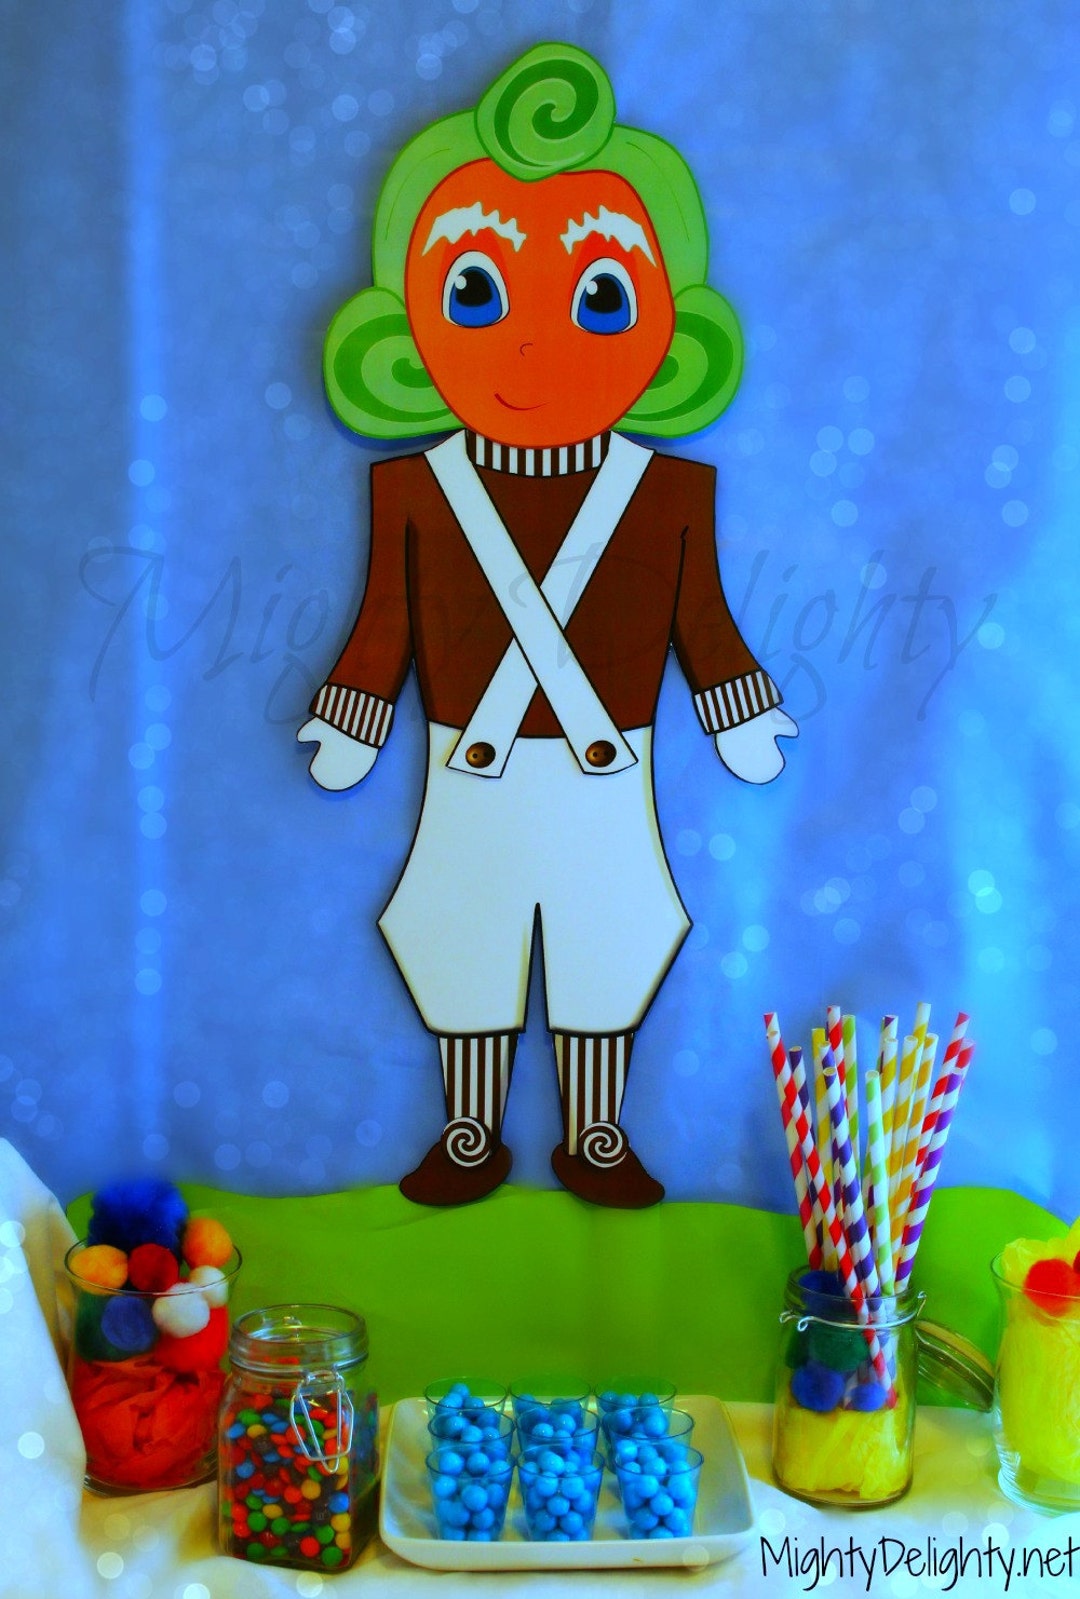 Oompa Loompa Party Decoration Stands 23 Inches Tall Perfect photo photo